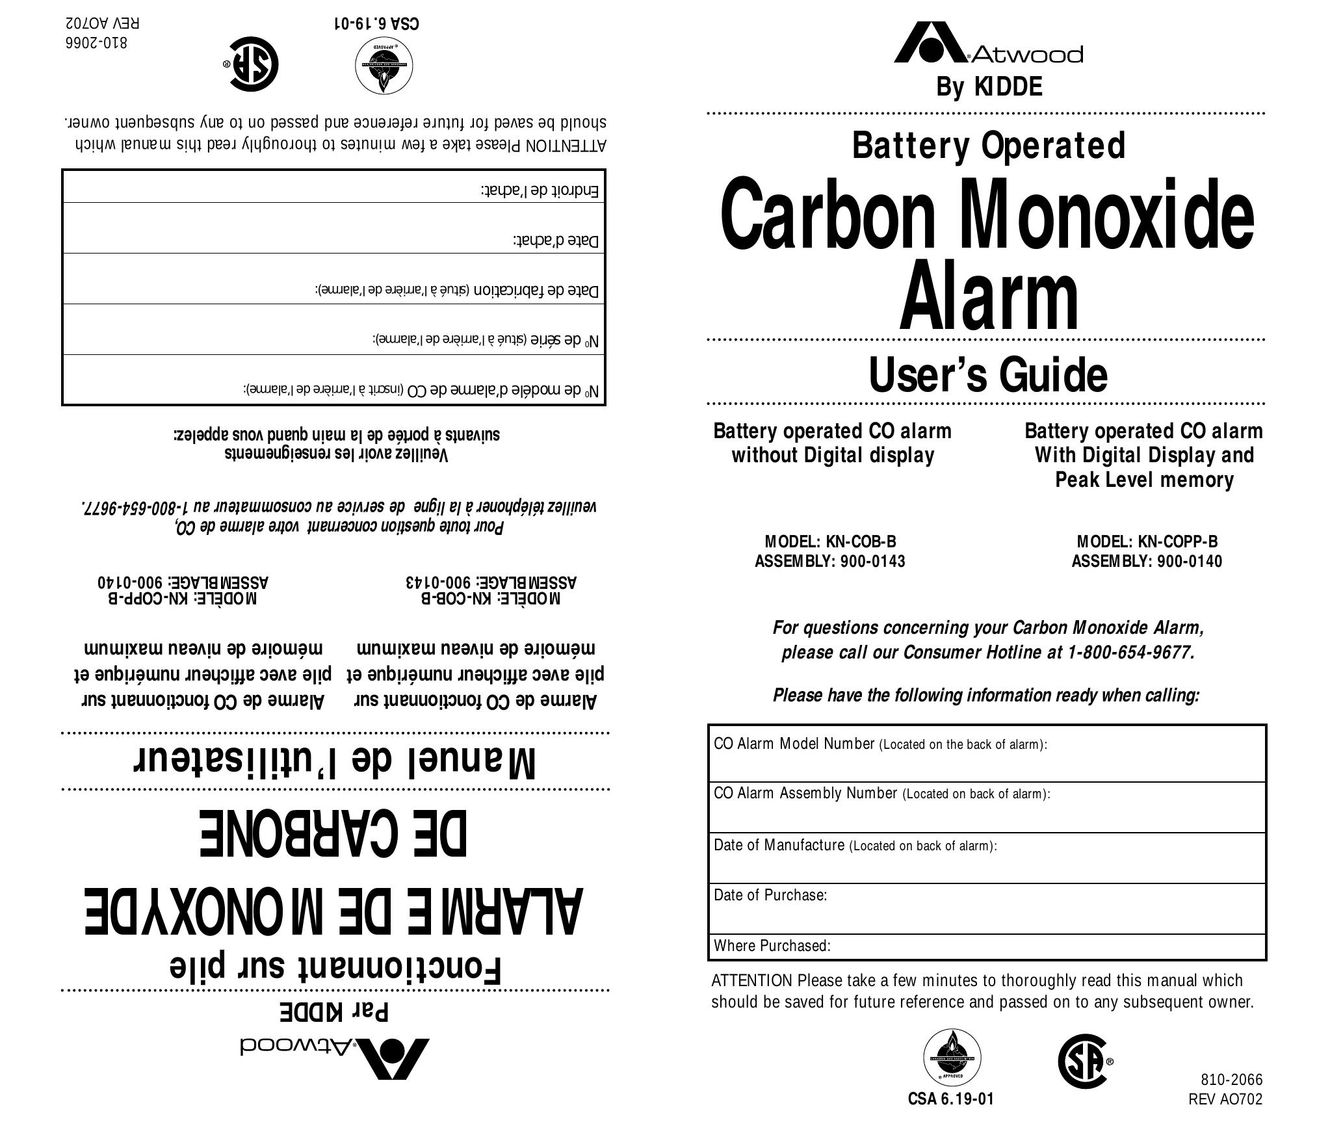 Atwood Mobile Products KN-COPP-B Carbon Monoxide Alarm User Manual